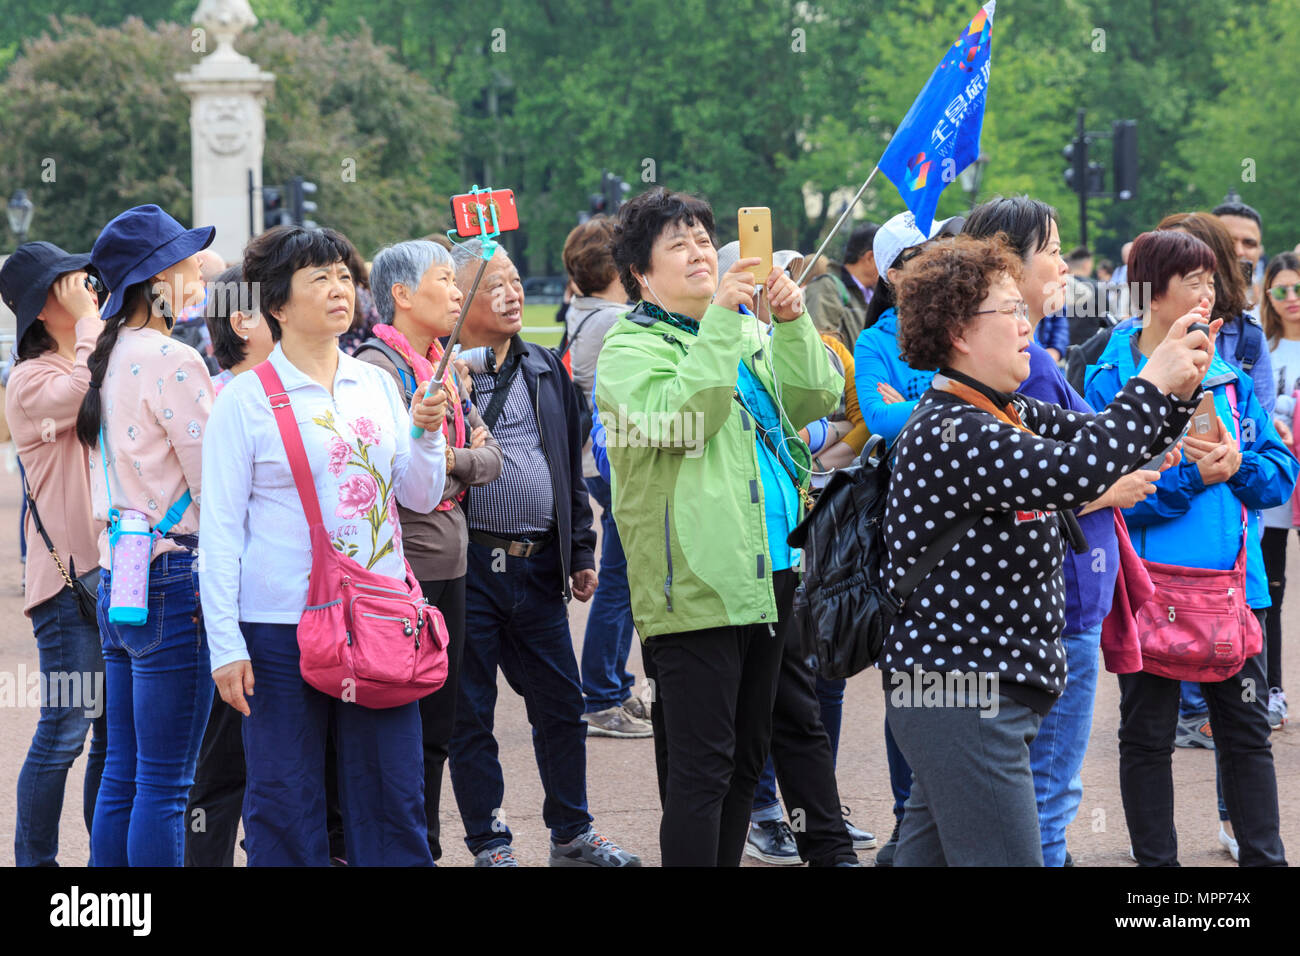 Buckingham Palace, London, 24th May 2018. An Asian tour group takes pictures of people going into the Palace. People queuing to enter the Palace for the The Duke of Edinburgh's Awards mix with curious tourists and Londoners enjoying the afternoon sunshine at Buckingham Palace. The Awards are a youth awards programme founded in the United Kingdom in 1956 by Prince Philip, Duke of Edinburgh. Credit: Imageplotter News and Sports/Alamy Live News Stock Photo